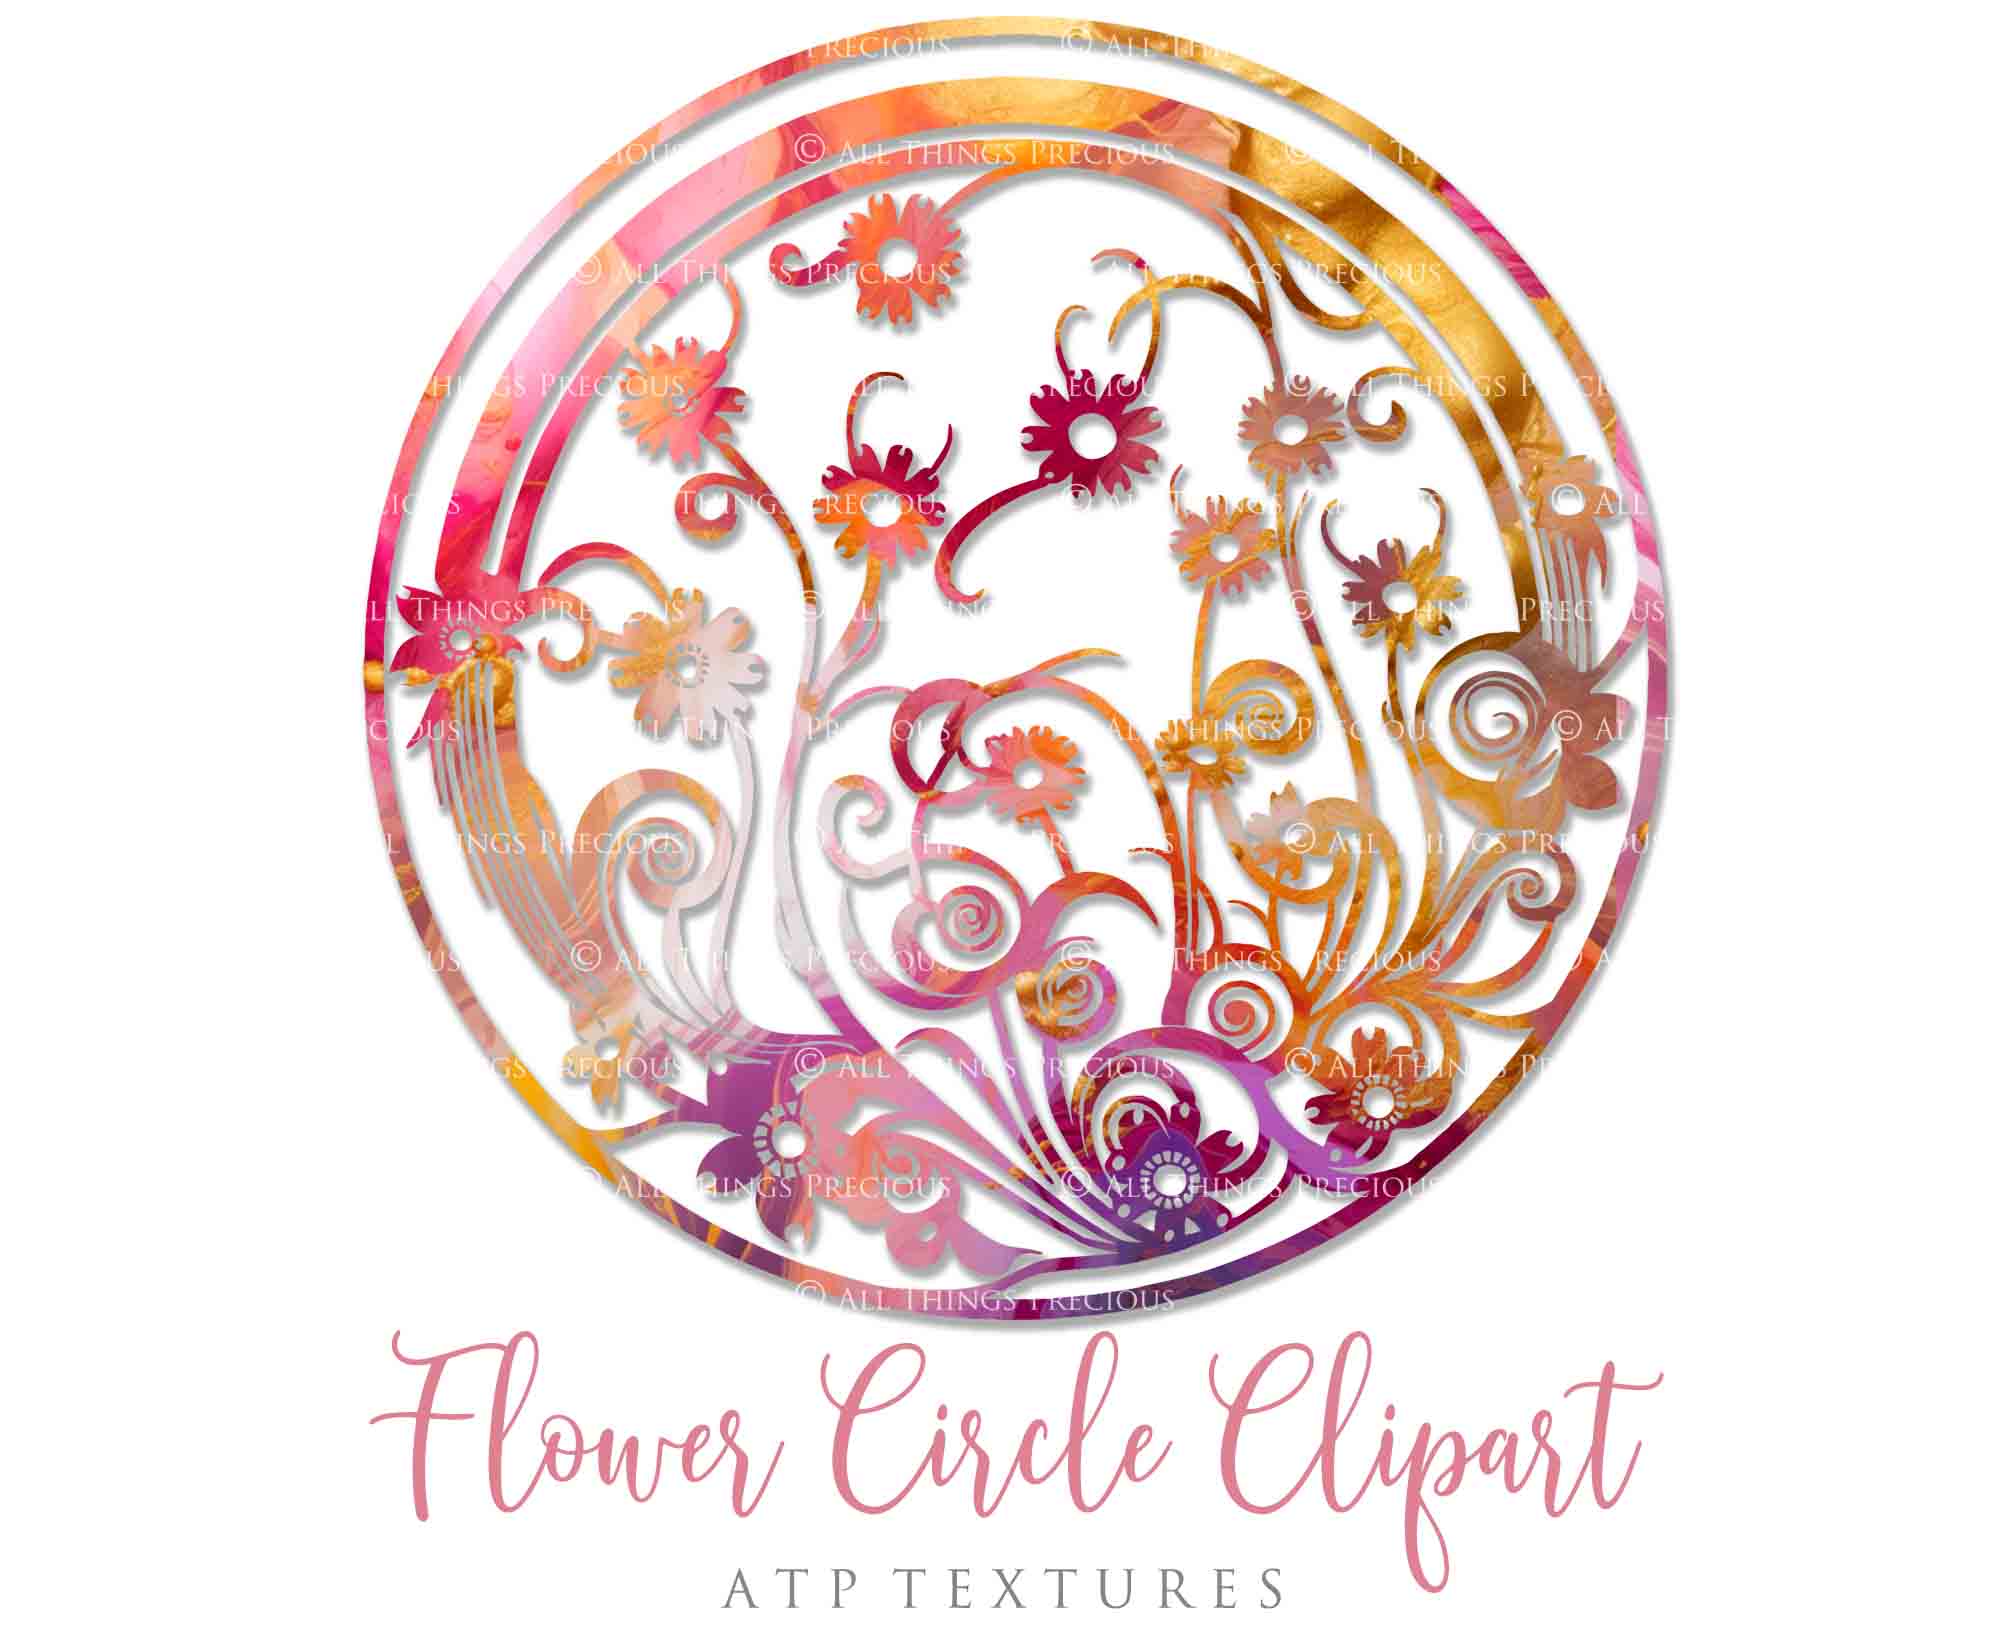 Svg Flower Circle Clipart. Svg, Png Clipart for Cricut or Silhouette Cameo. Sublimation art.  Cut or Print. High resolution files.